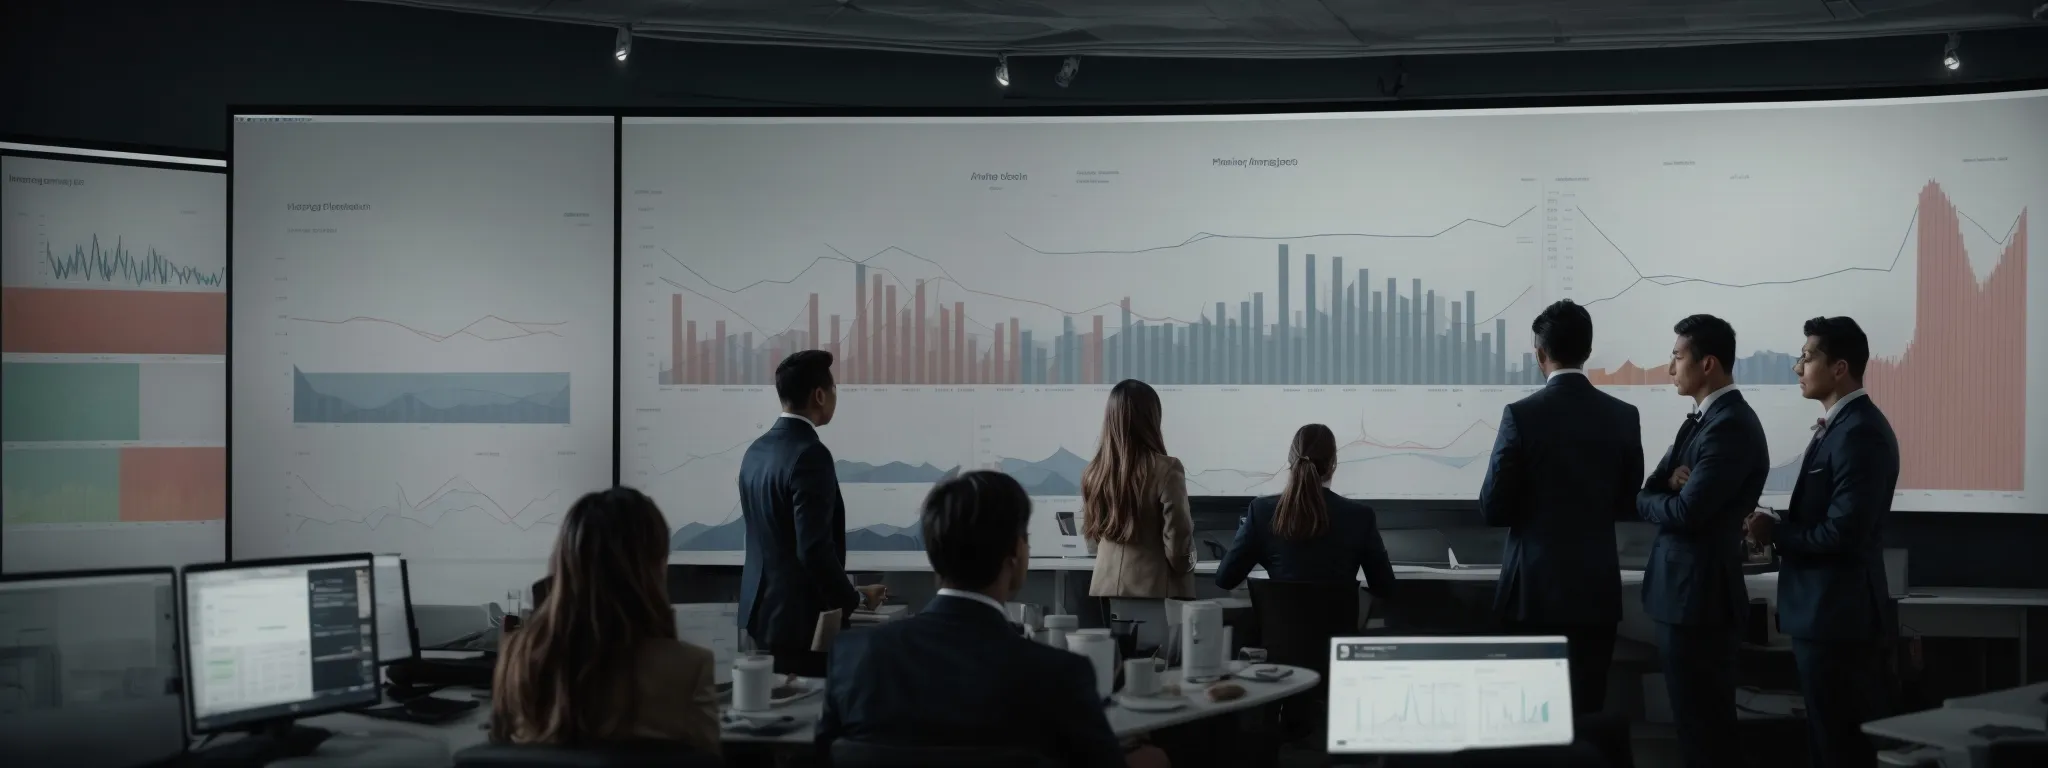 a marketing team analysis session with charts and graphs projected on a screen.